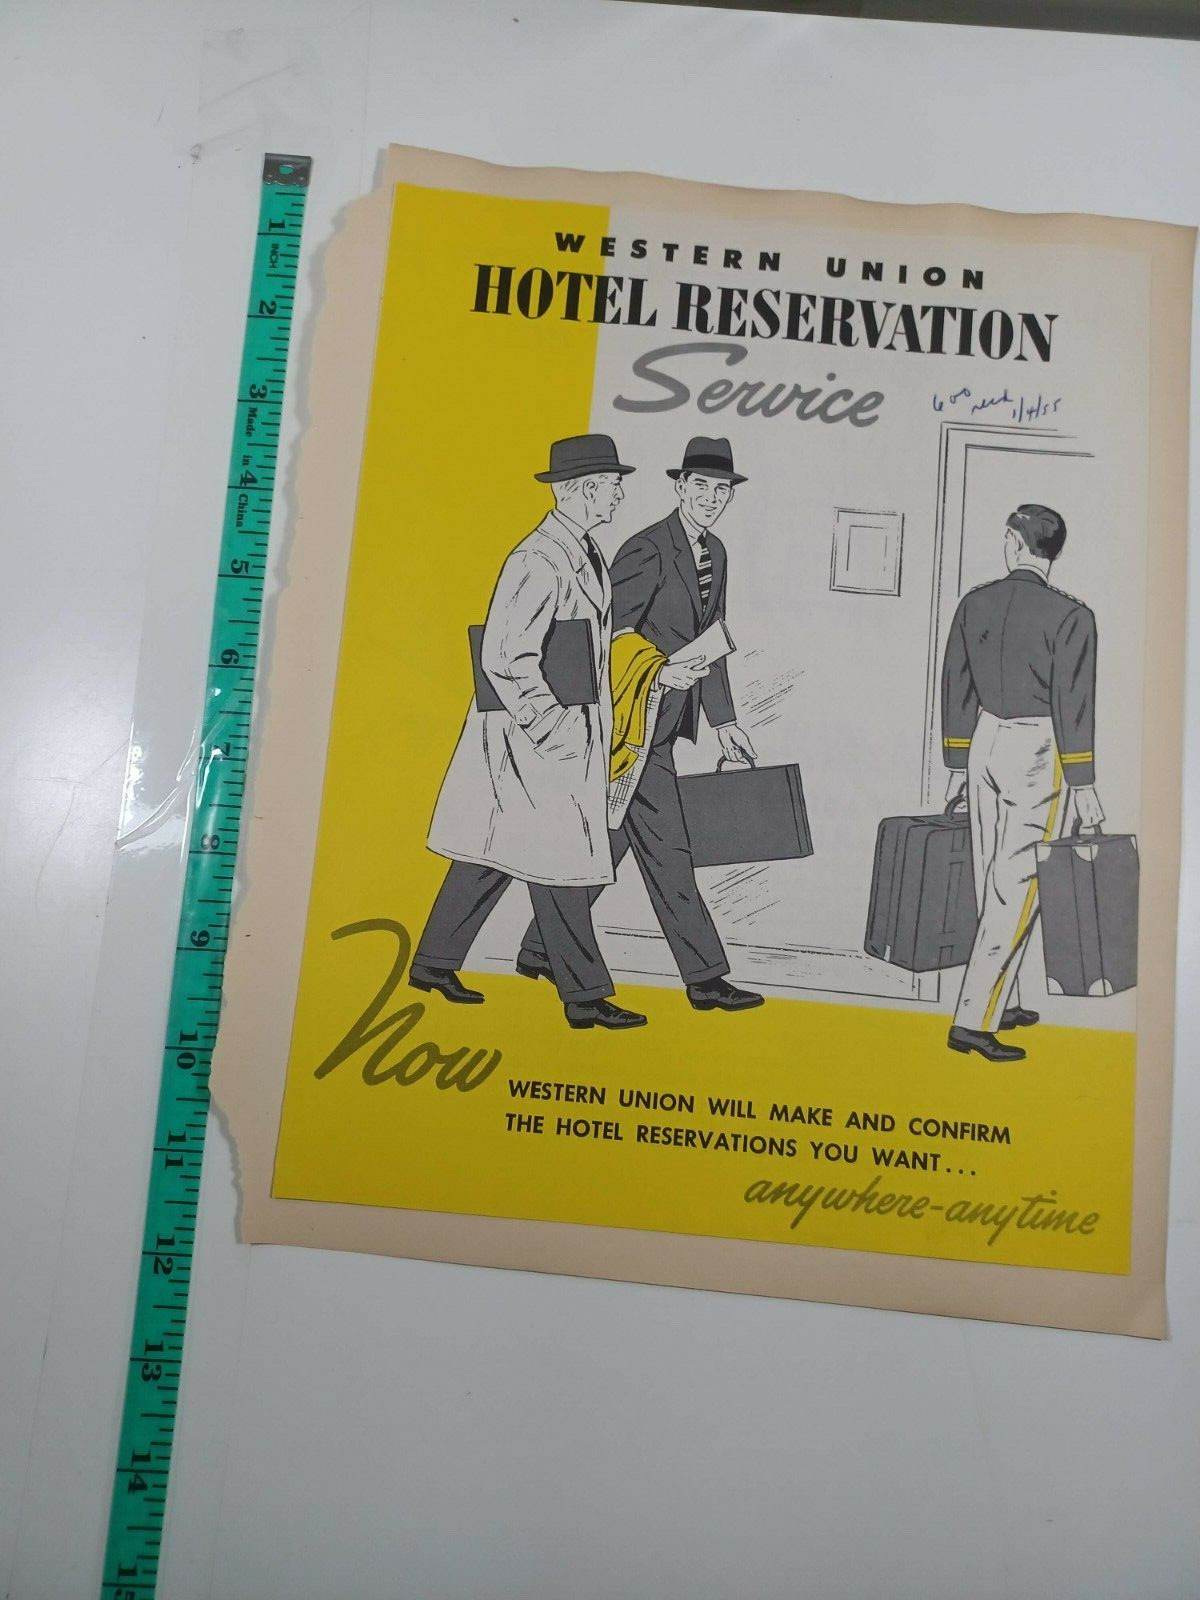 western union ads hotel reservation service 2 sides (Book 1 #9)